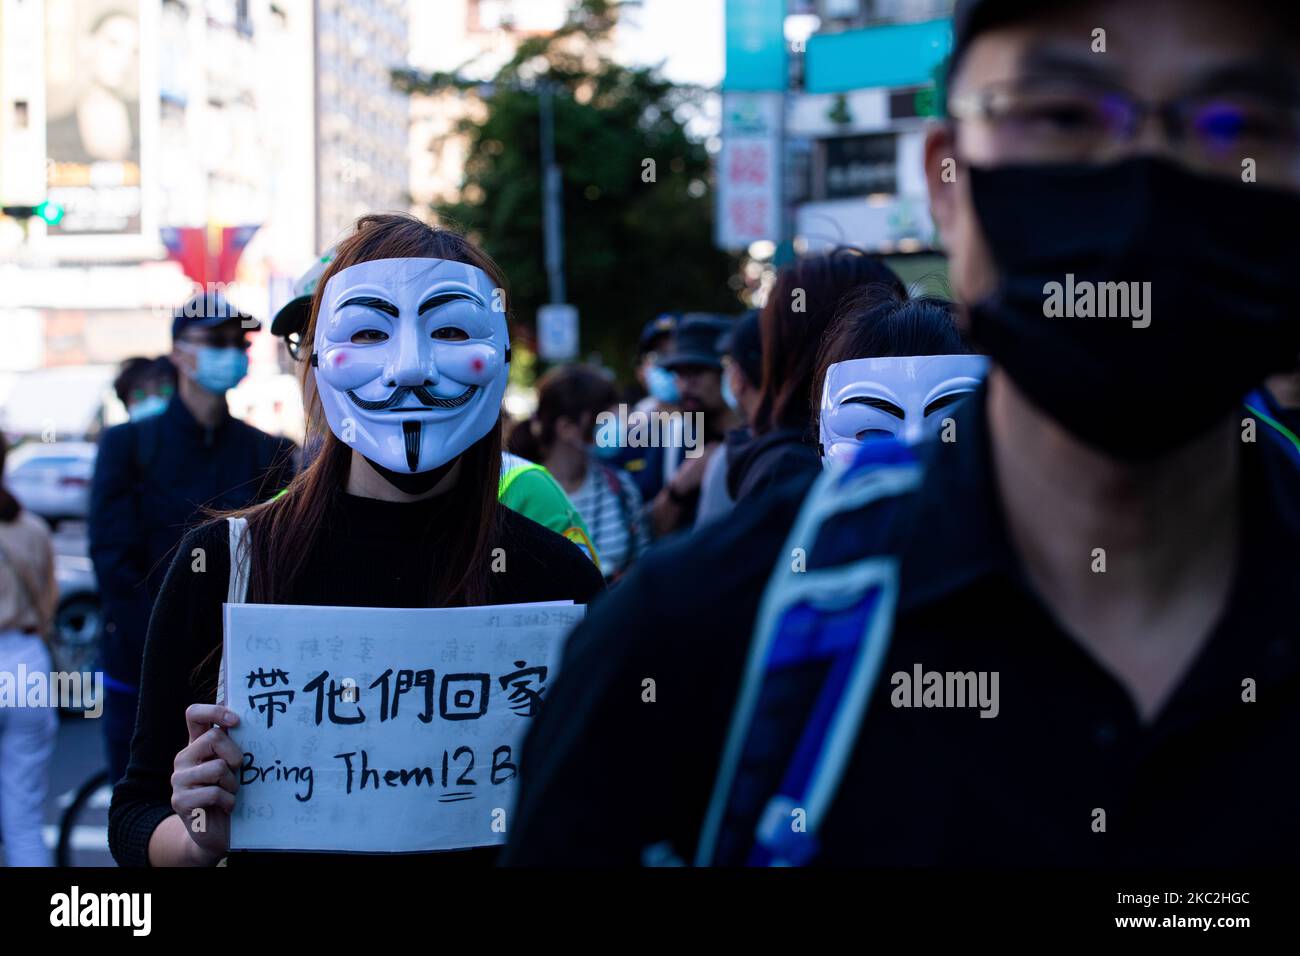 A protester wears Vendetta mask during the march to demand the release of 12 Hong Kong detainees in Taipei, Taiwan, on October 25, 2020. Hundreds marched in Taiwan's capital on Sunday to demand the release of 12 Hong Kong anti-government protesters who were allegedly traveling illegally by boat to Taiwan when Chinese authorities captured and detained them in August. (Photo by Annabelle Chih/NurPhoto) Stock Photo